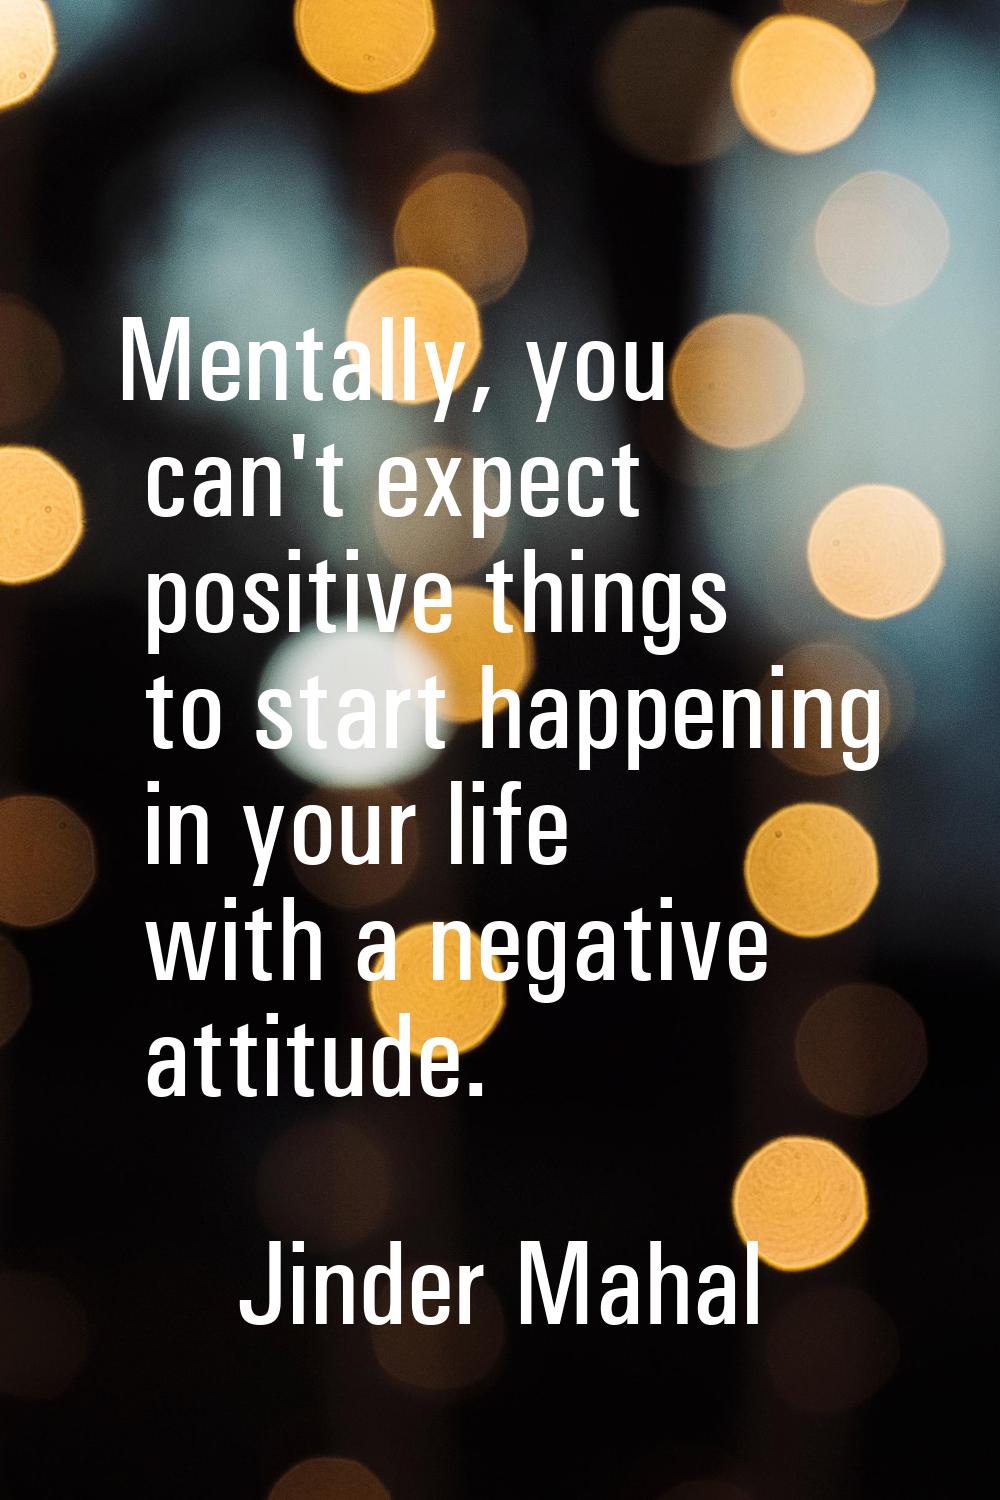 Mentally, you can't expect positive things to start happening in your life with a negative attitude